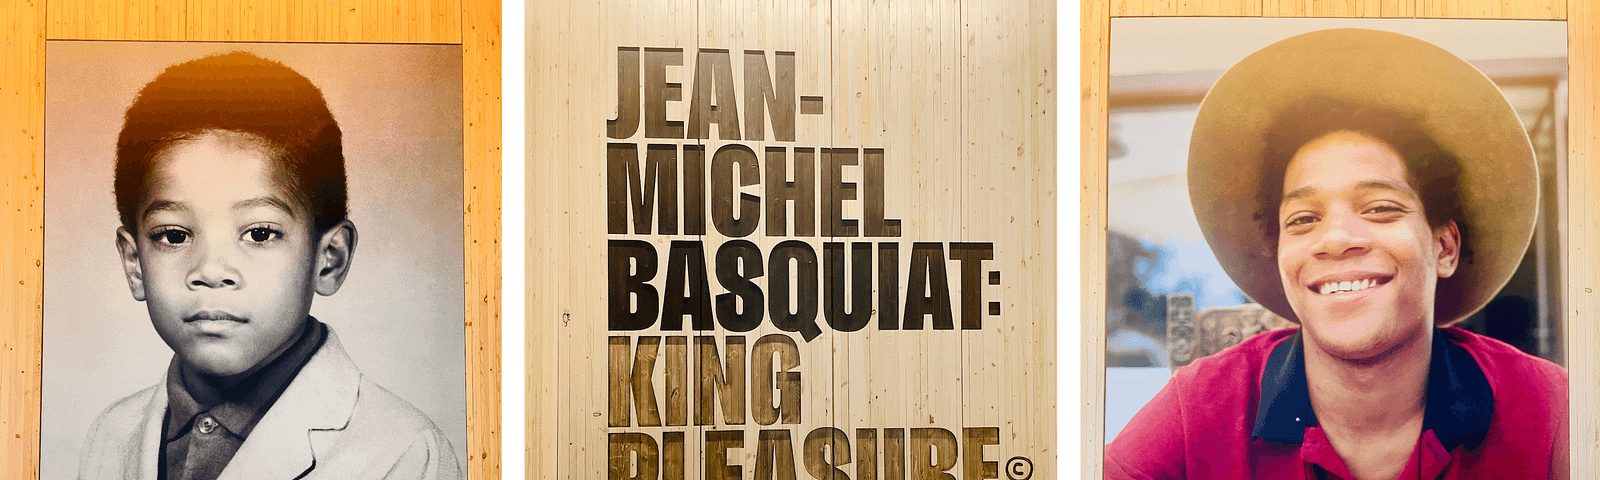 A trio of images: Jean-Michel Basquiat as a child in 1965, Wood carving of King Pleasure © Exhibit in NYC, Jean-Michel Basquiat at 18 in 1983.